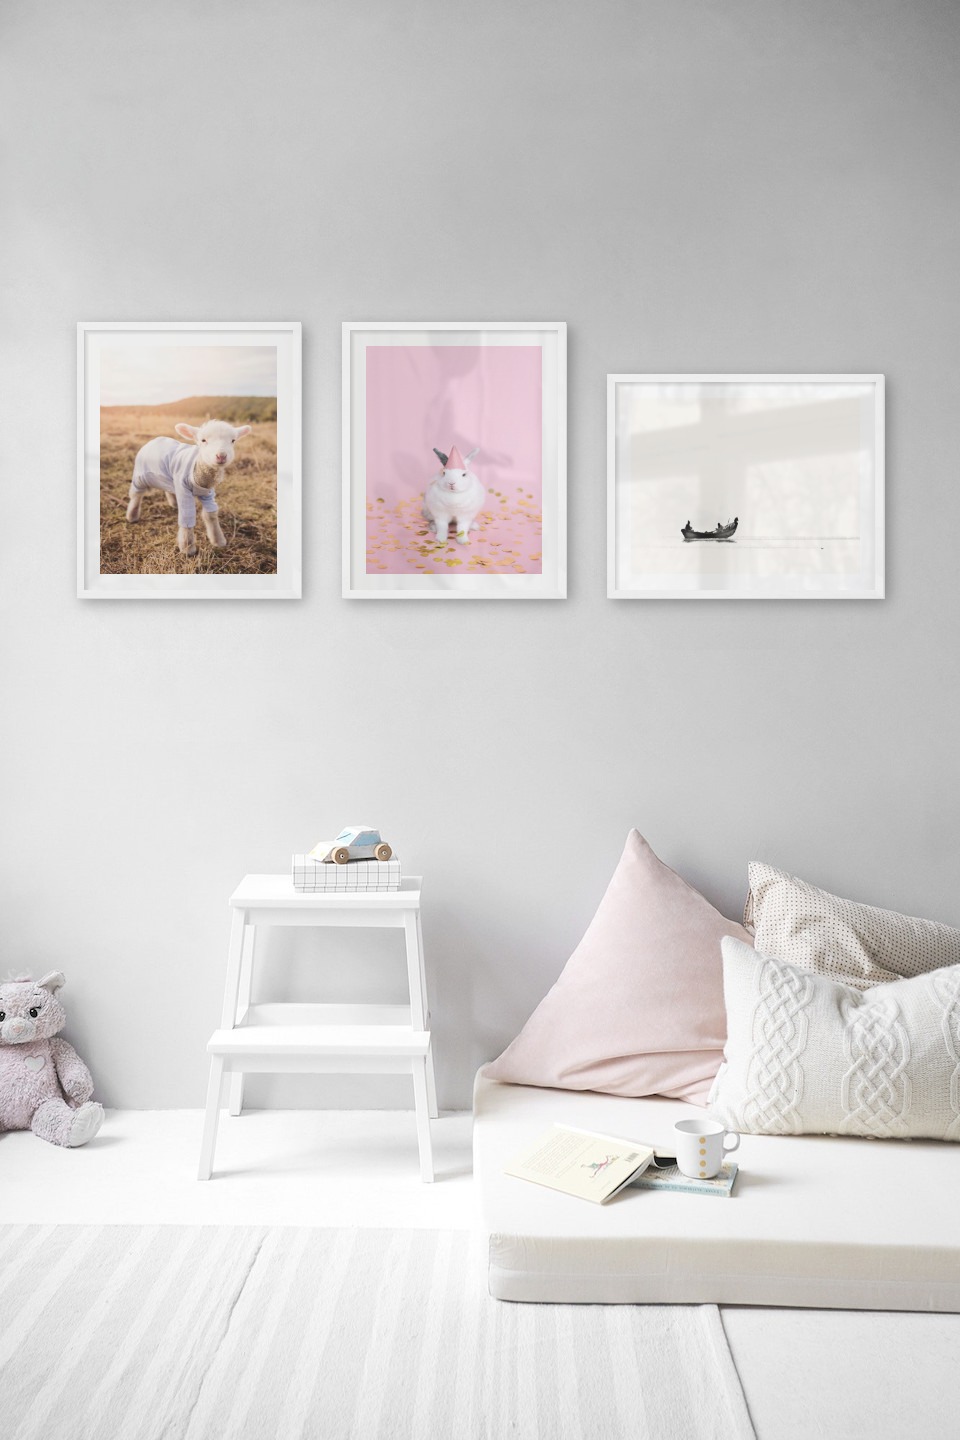 Gallery wall with picture frames in white in sizes 40x50 with prints "Lamb", "Rabbit with party hat" and "People in boat"